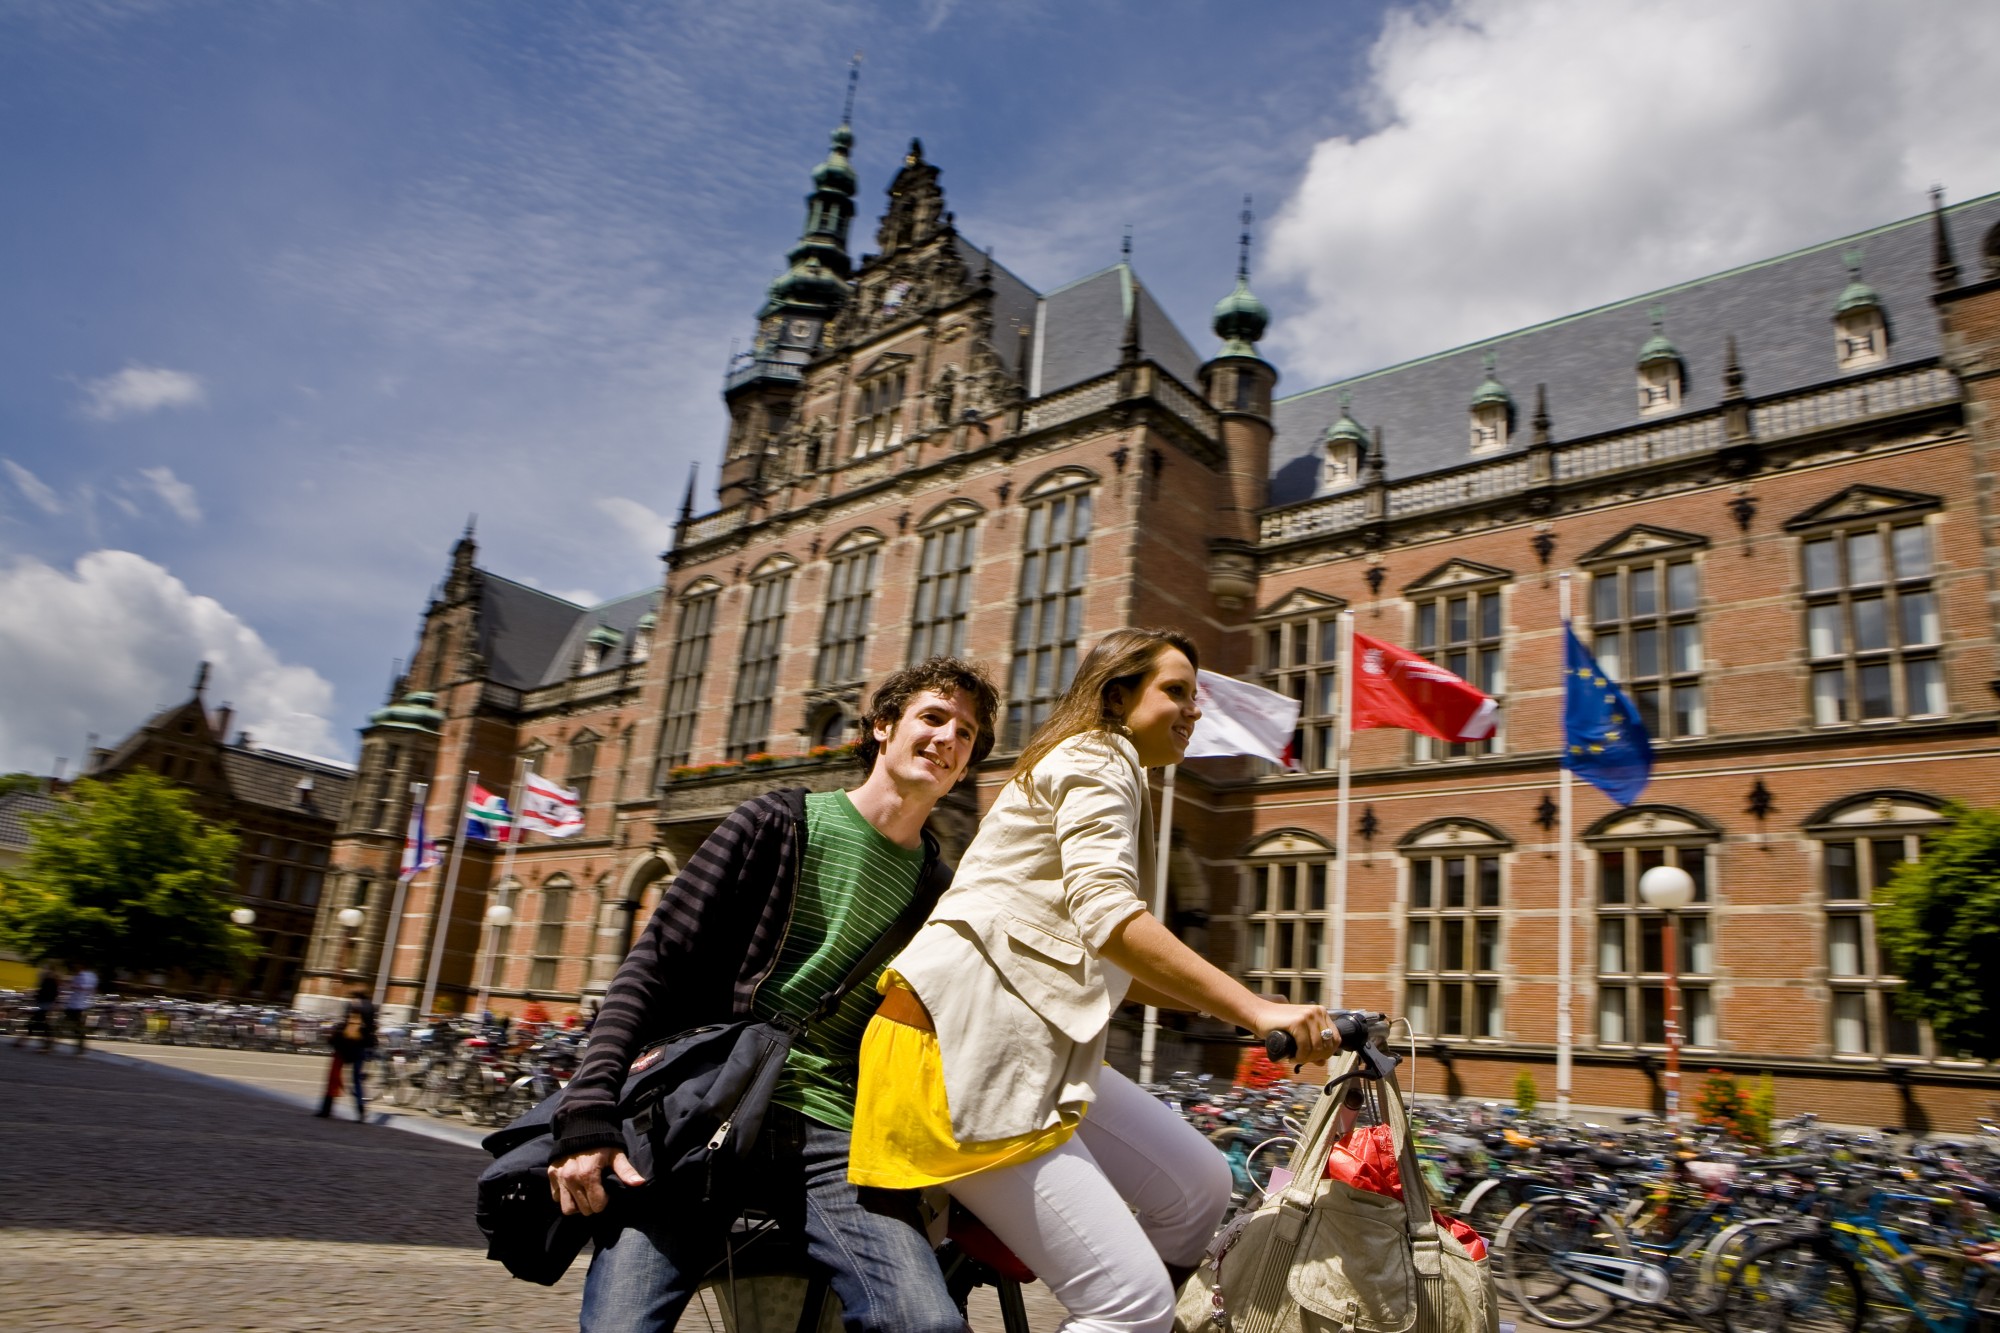 Open day at the university of Groningen | News articles | News and ...